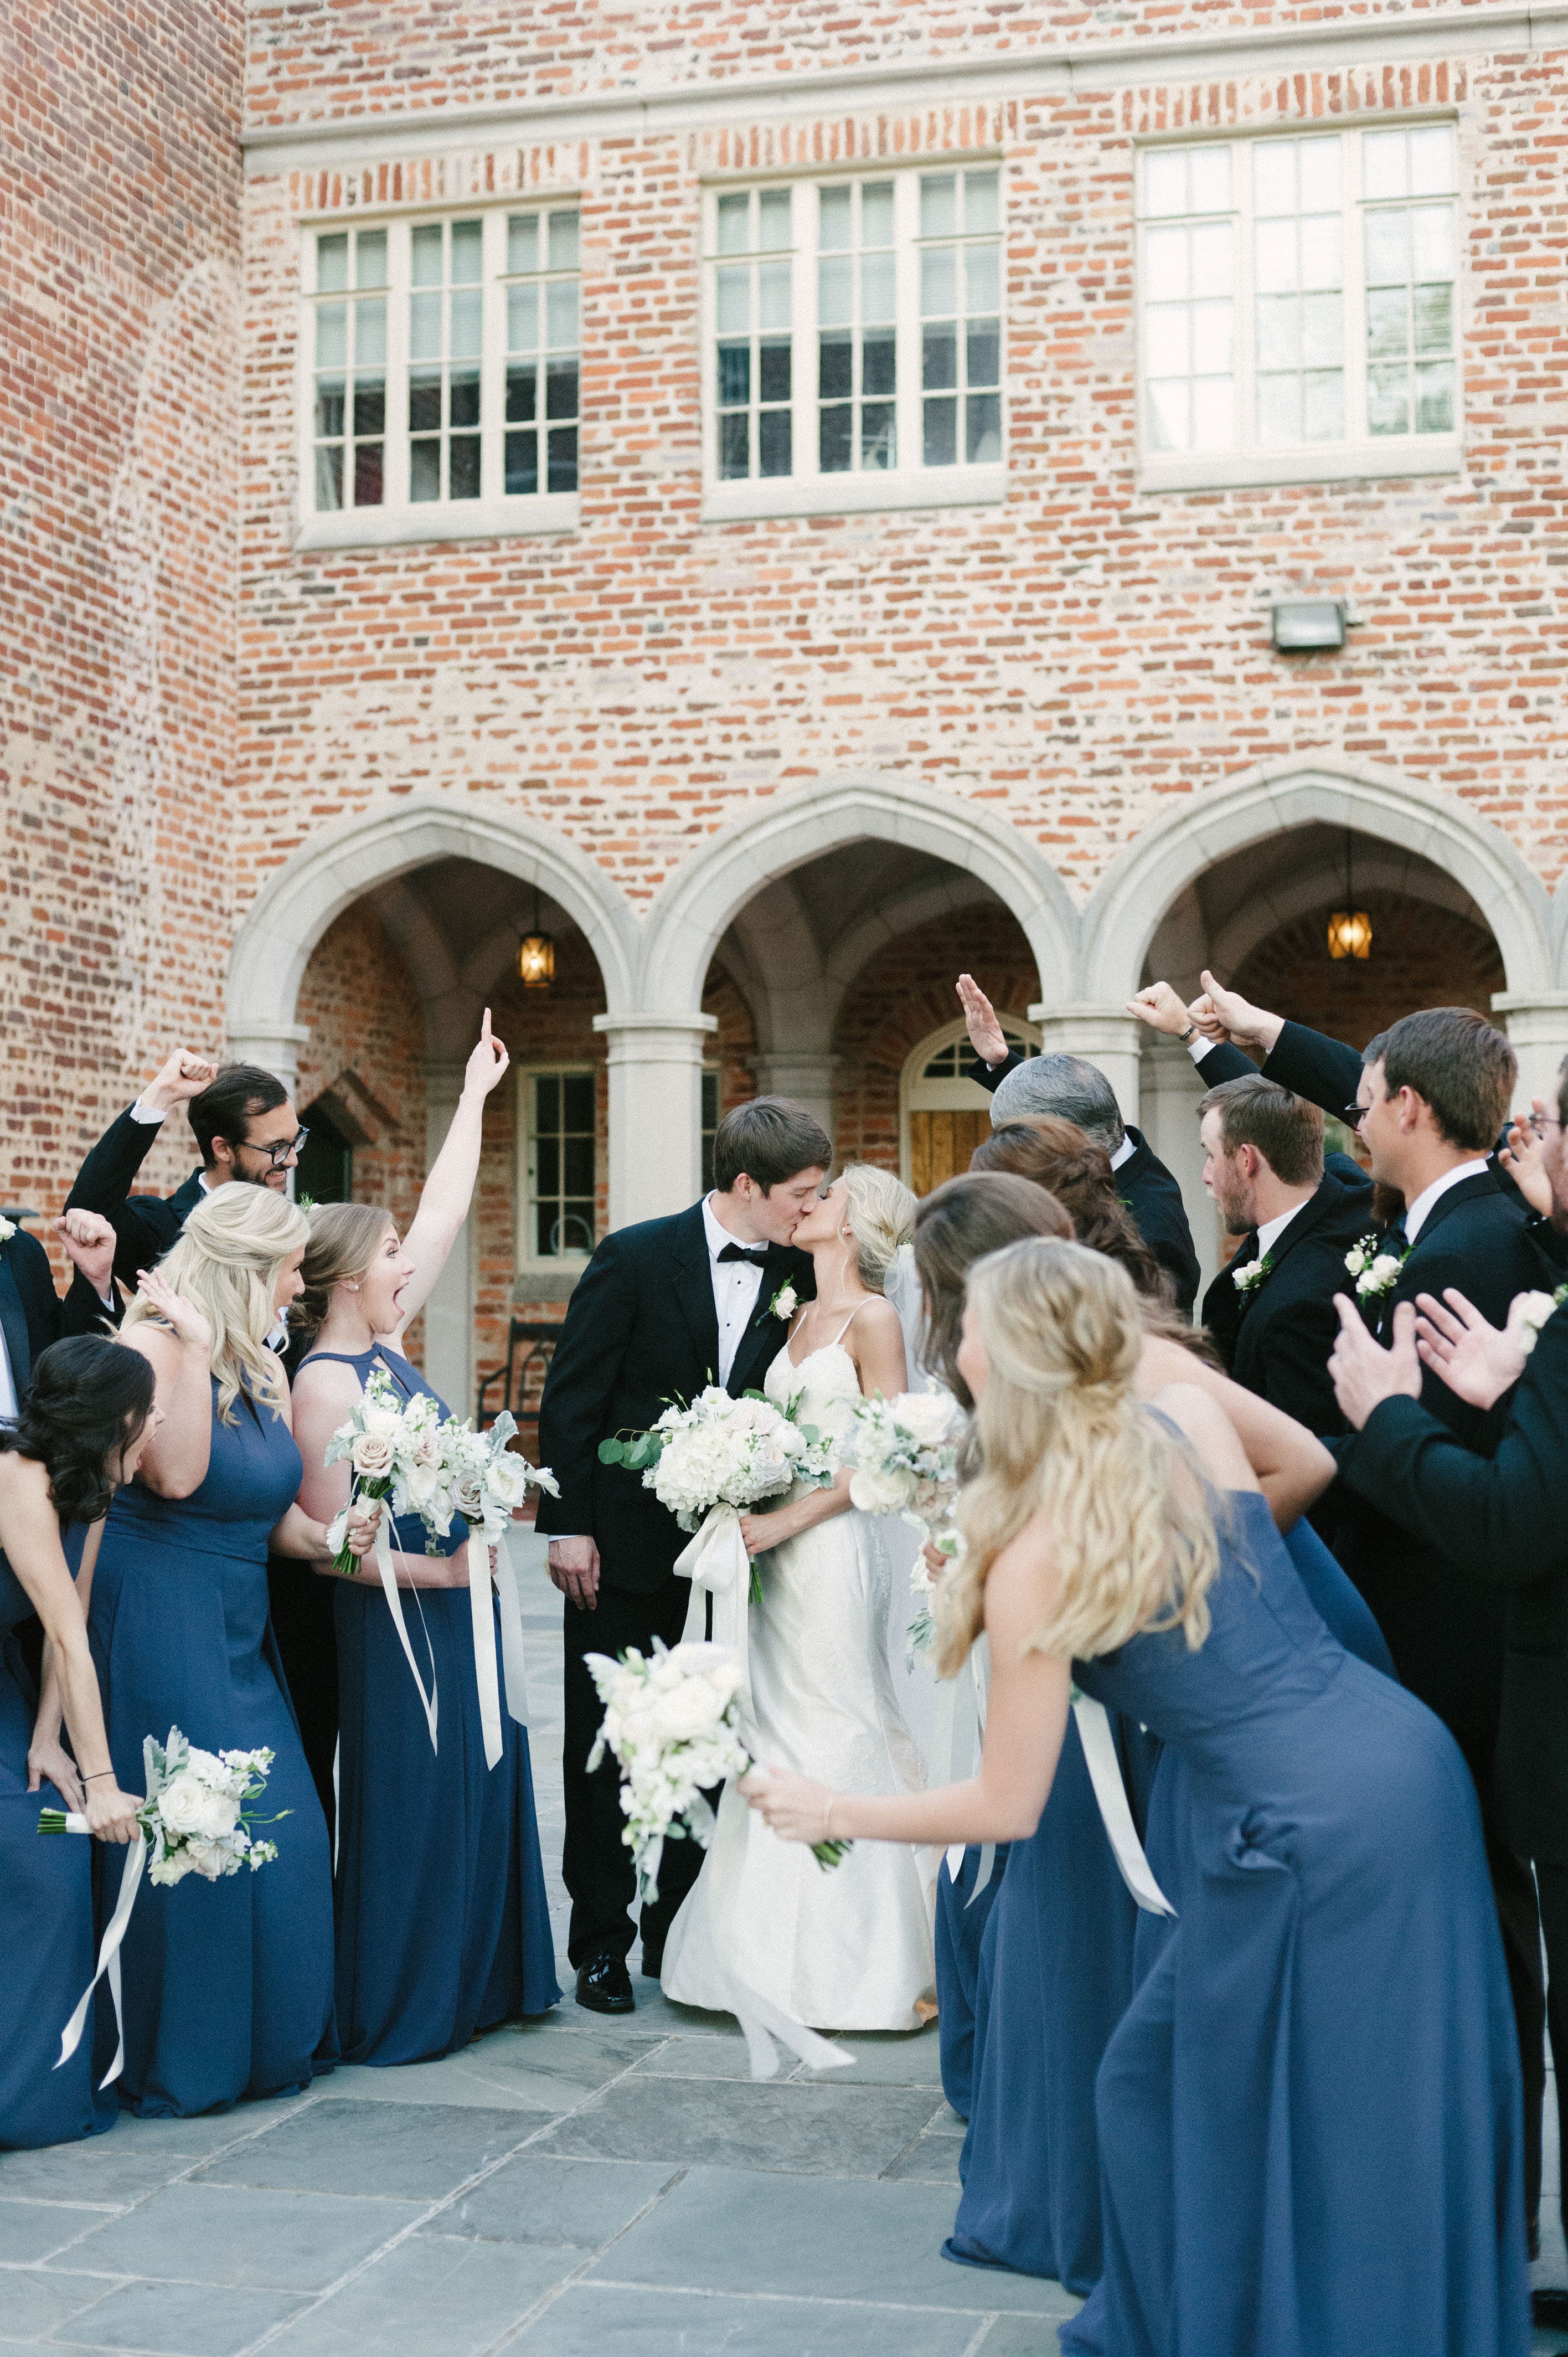 The ultimate wedding party getting excited as a newly married couple kisses in front of them in the courtyard at First Baptist Church in Selma, AL by Olivia Joy Photography